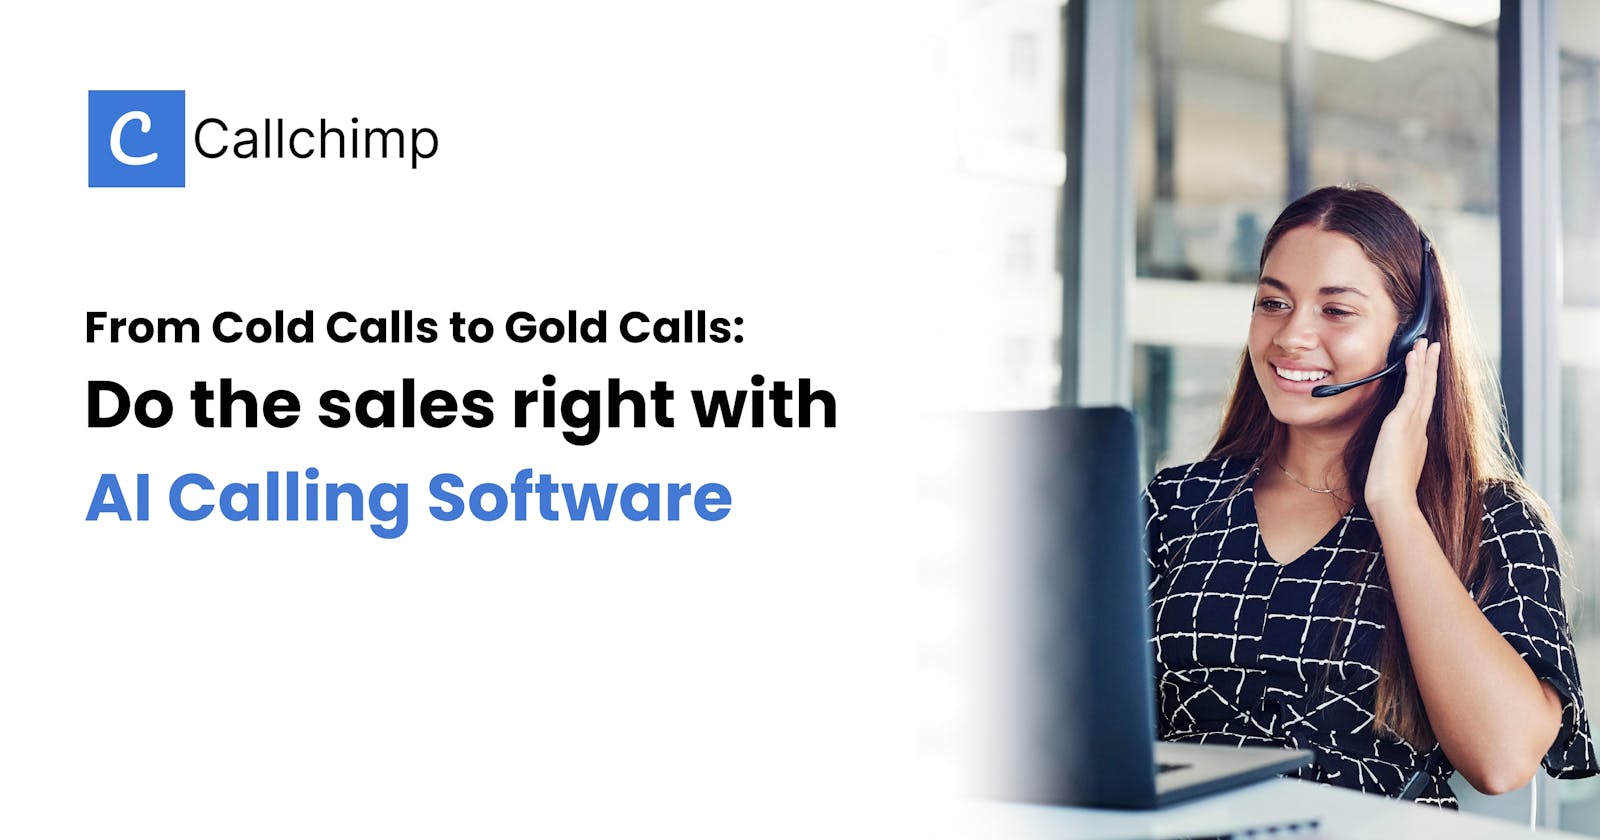 From Cold Calls to Gold Calls: Do the sales right with AI Calling Software